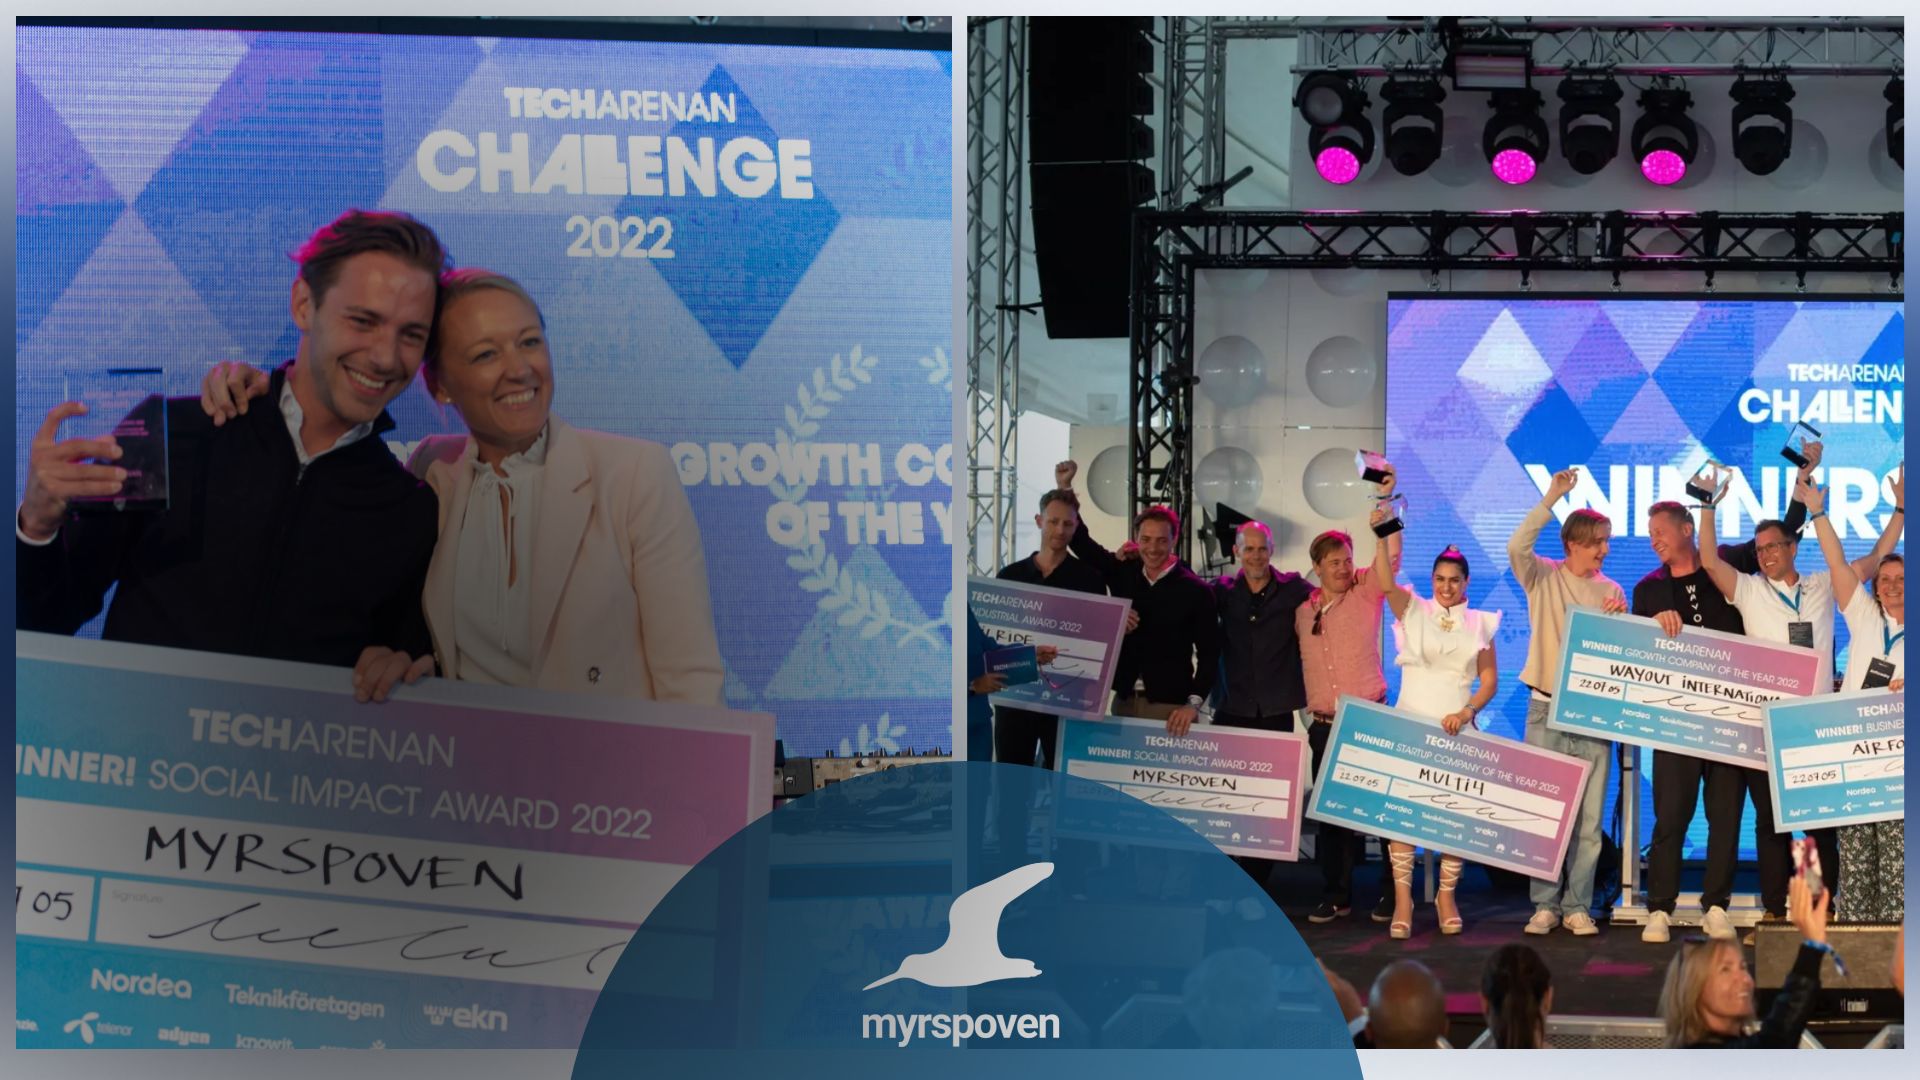 Myrspoven wins Social Impact Award 2022 at Techarenan Challenge in Visby